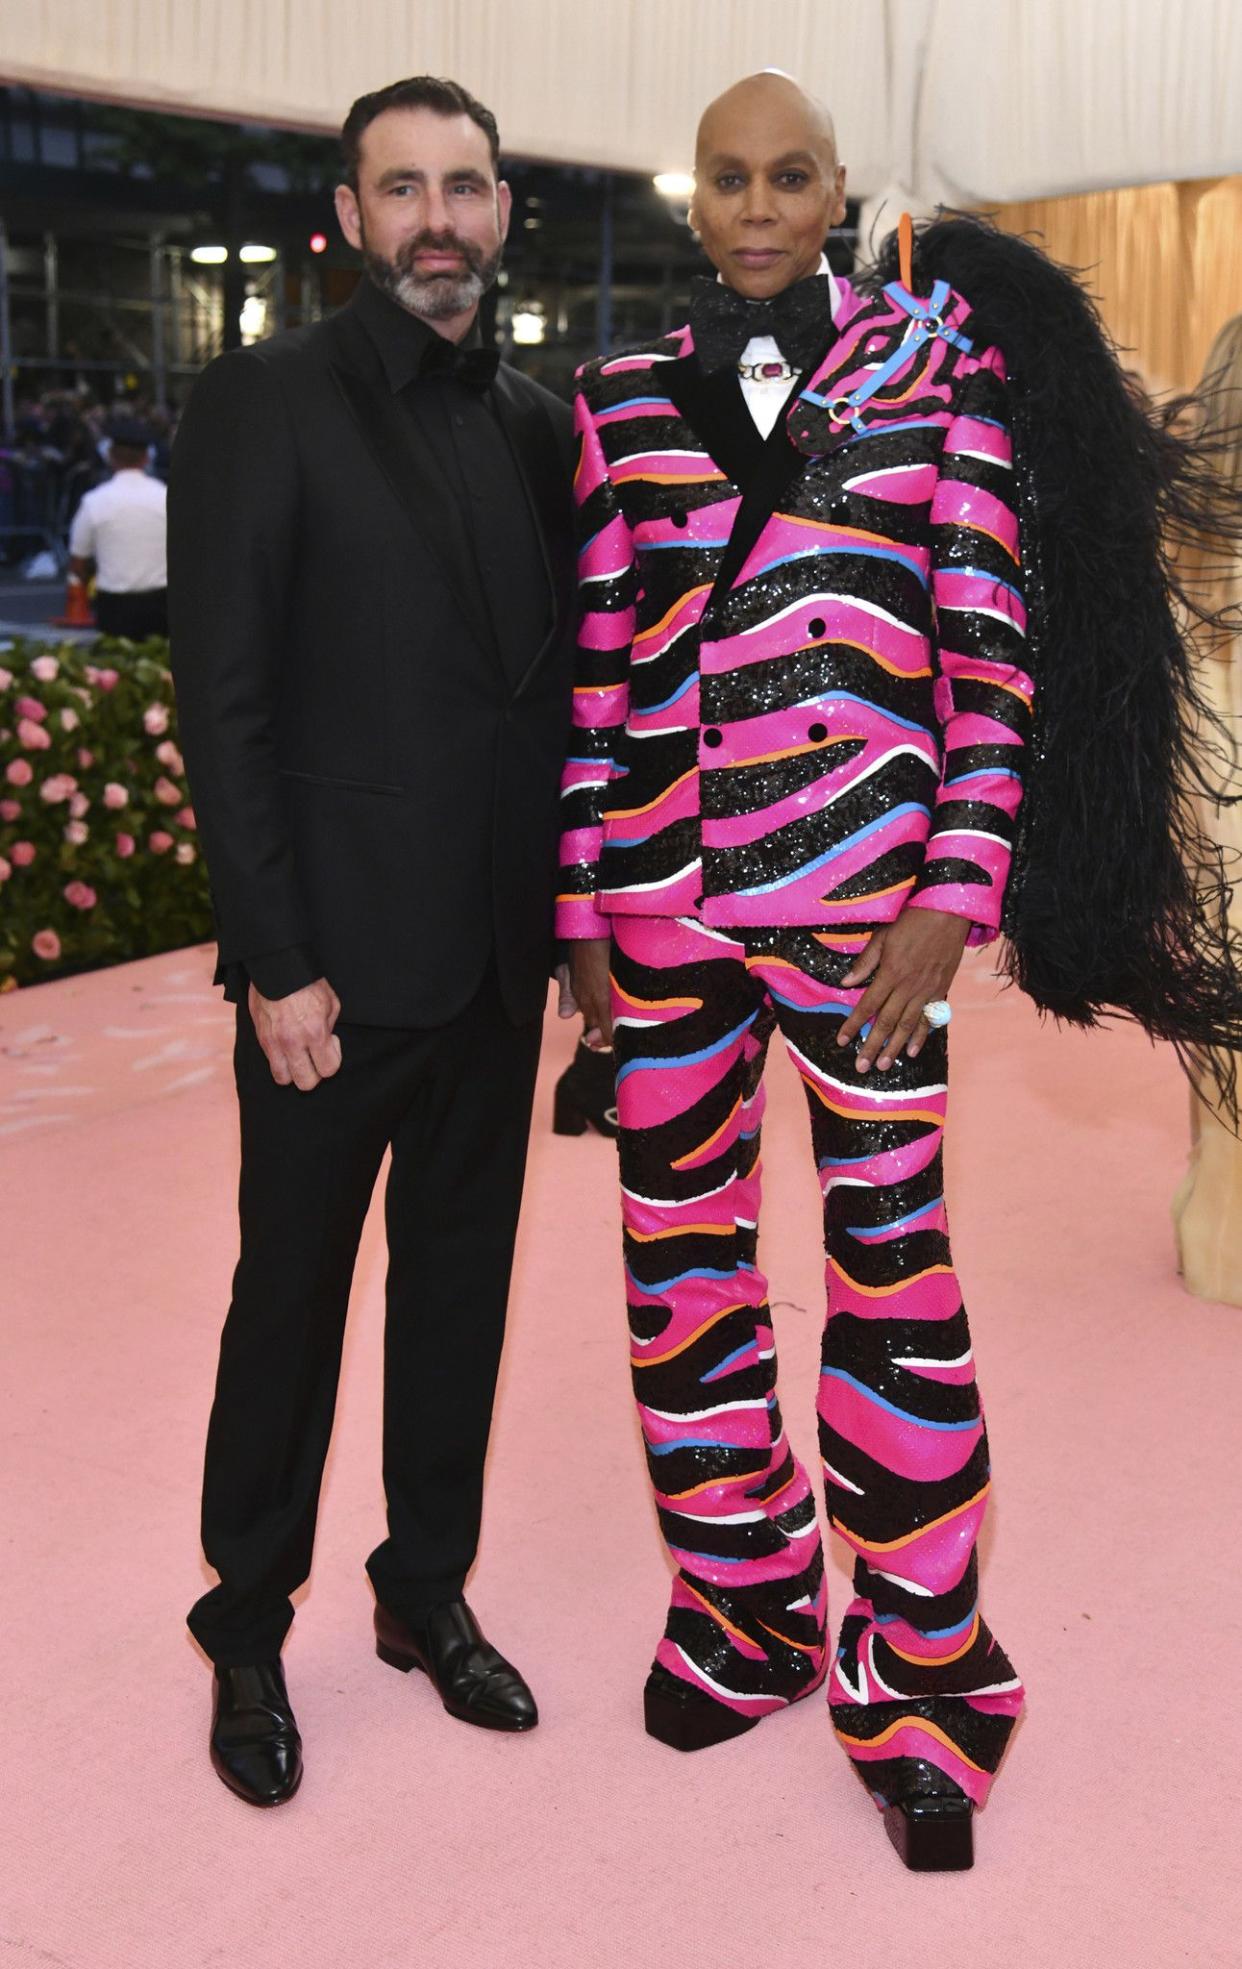 Georges LeBar, left, and RuPaul attend The Metropolitan Museum of Art's Costume Institute benefit gala celebrating the opening of the "Camp: Notes on Fashion" exhibition on Monday, May 6, 2019, in New York.